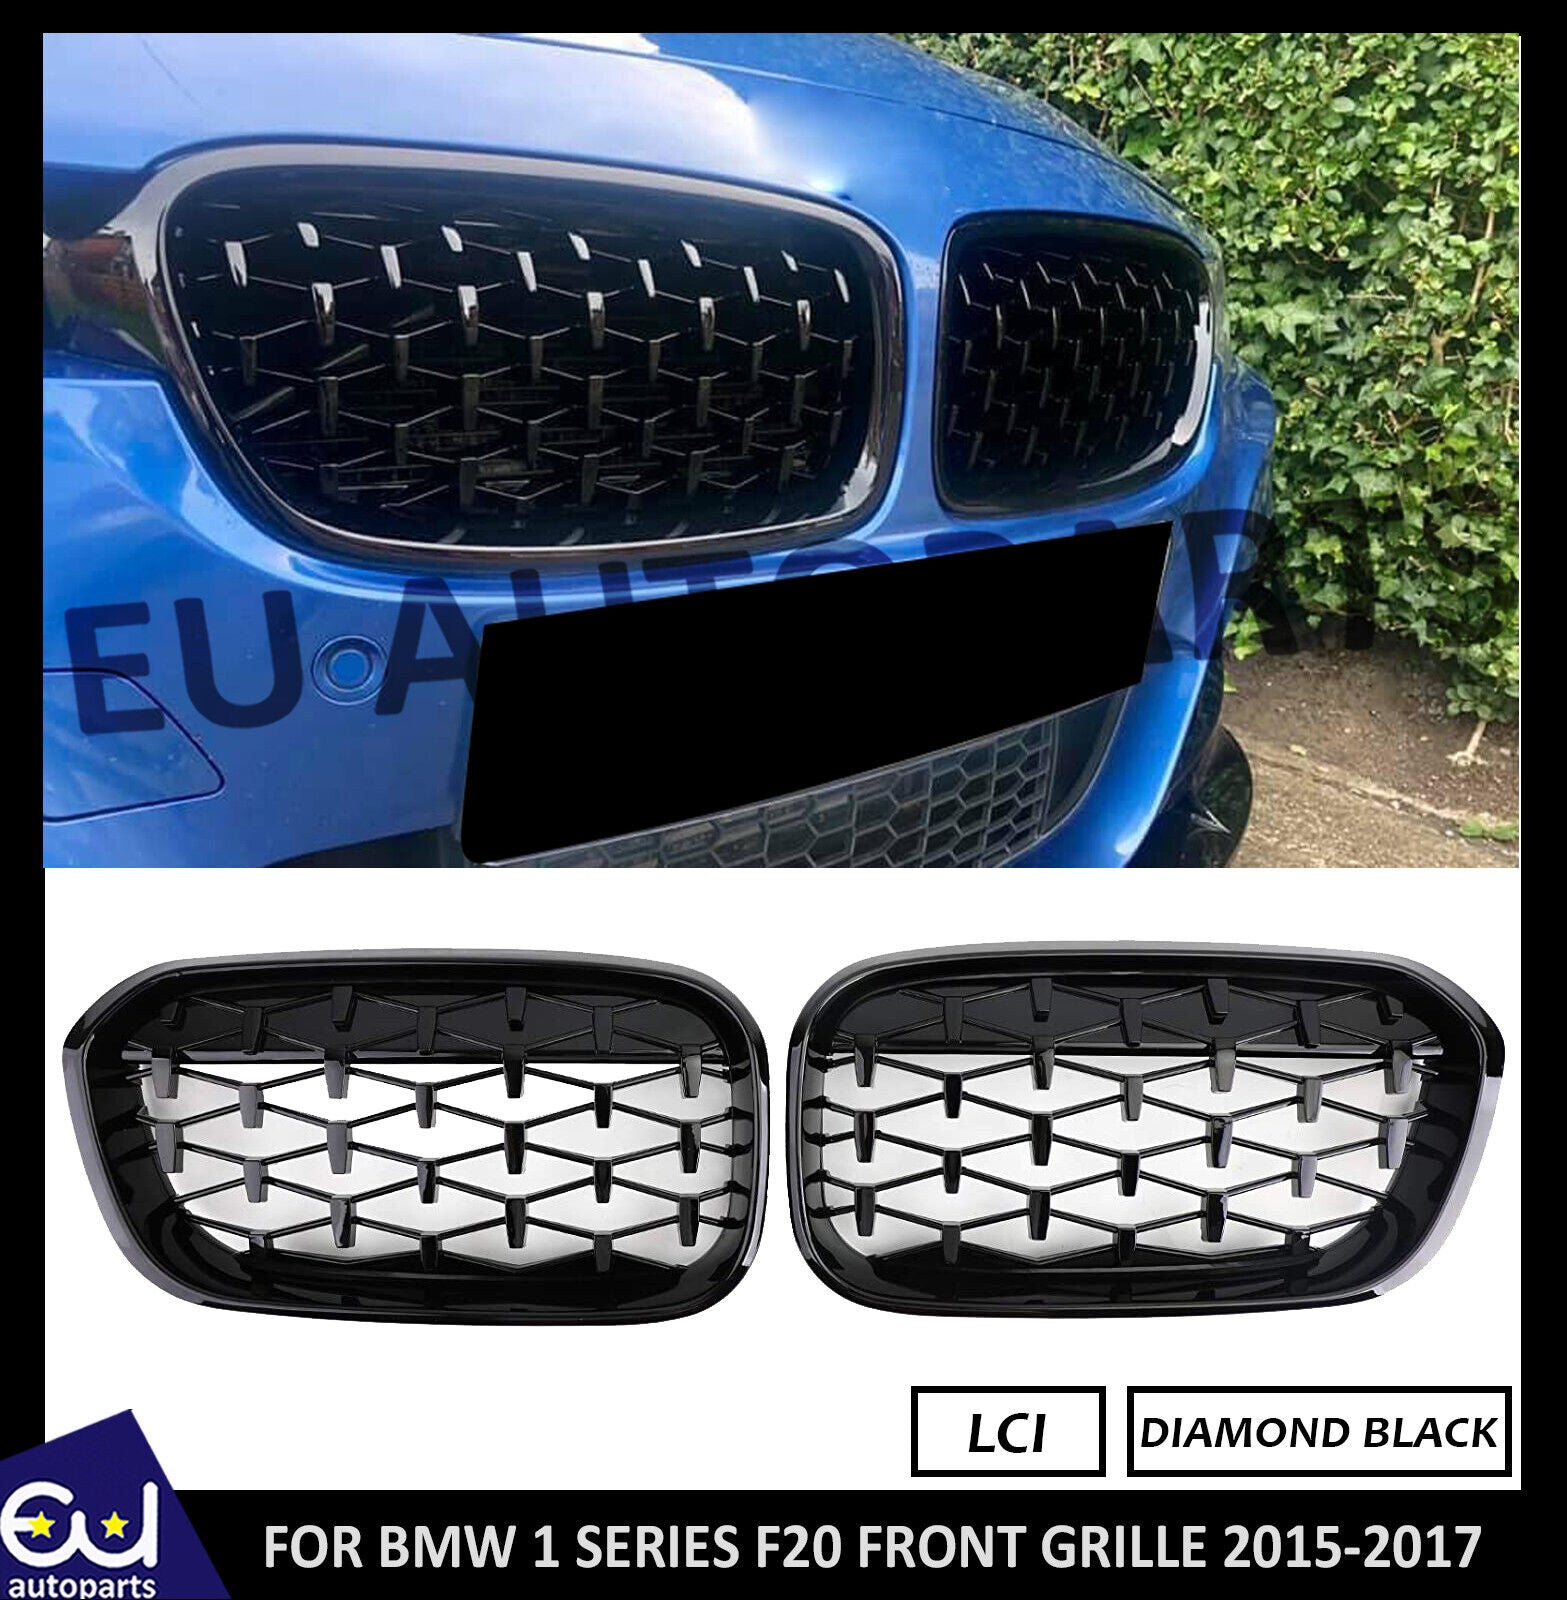 FOR BMW F20 F21 1 SERIES DIAMOND BLACK FRONT KIDNEY GRILLE GRILL 15-19